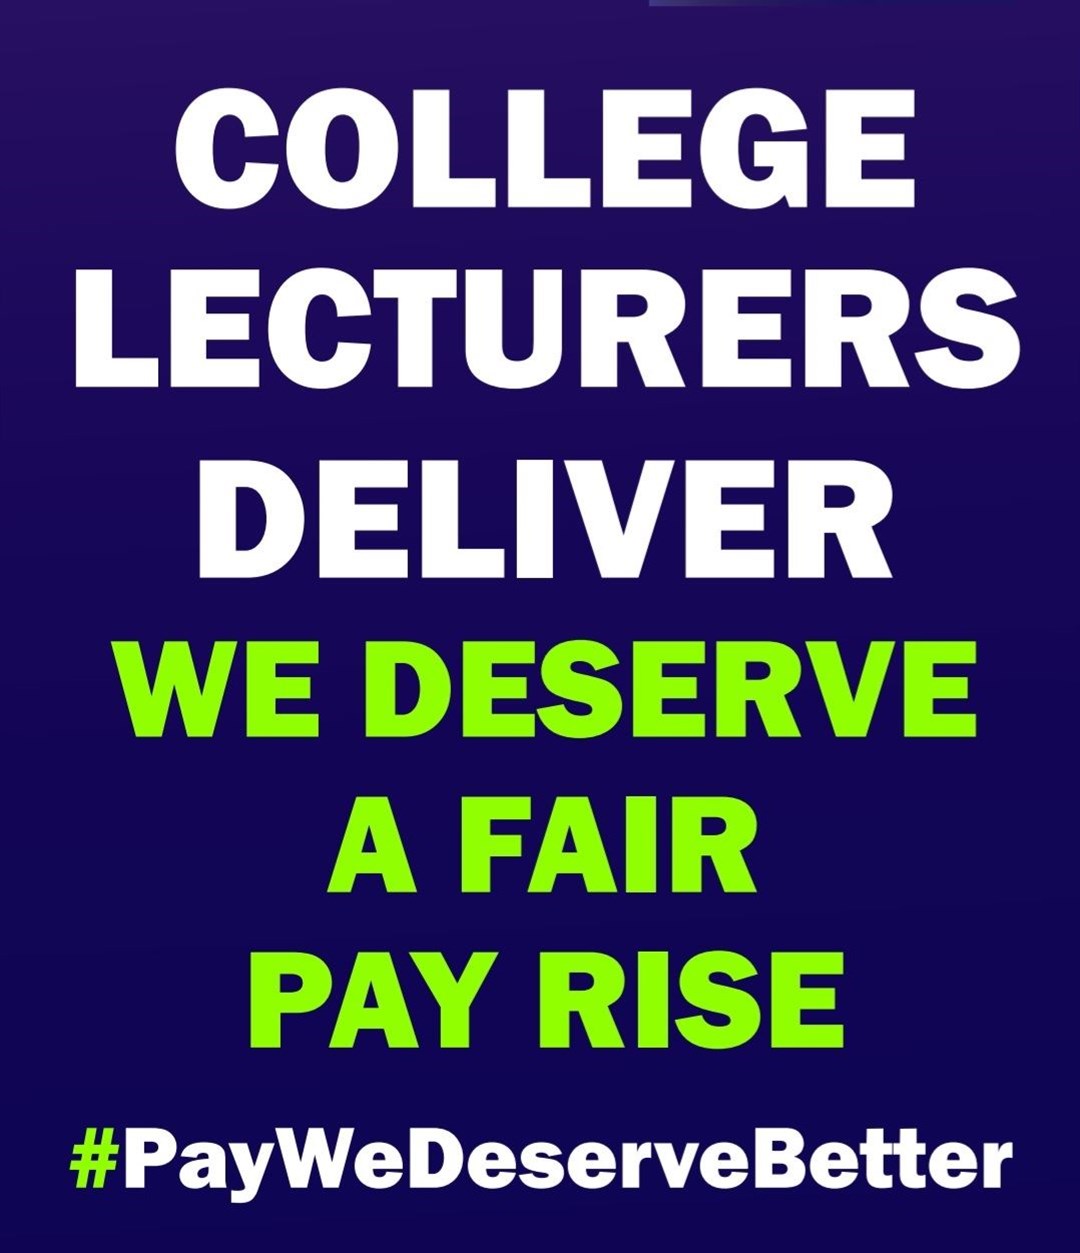 College lecturers have been on strike over pay.